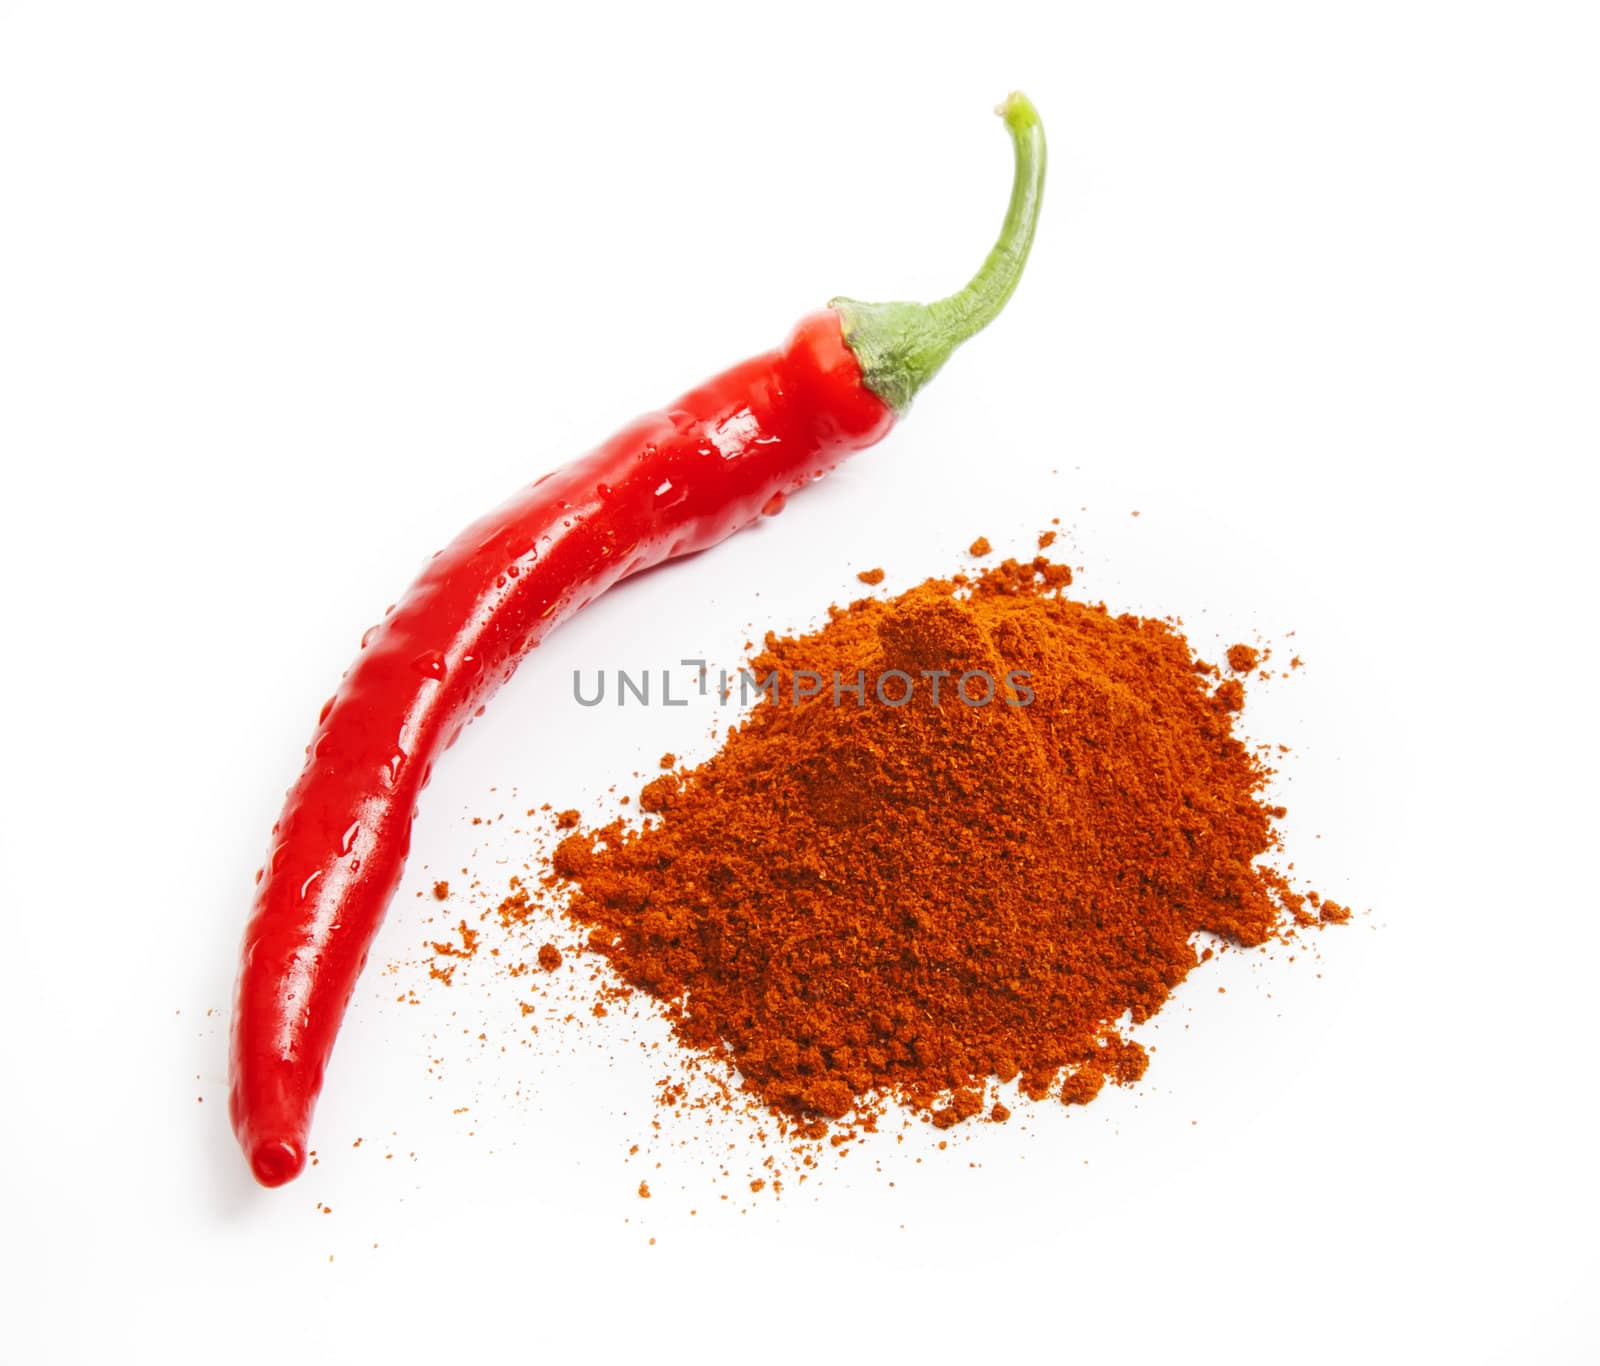 Paprika  with red chili peppers isolated on white by RawGroup